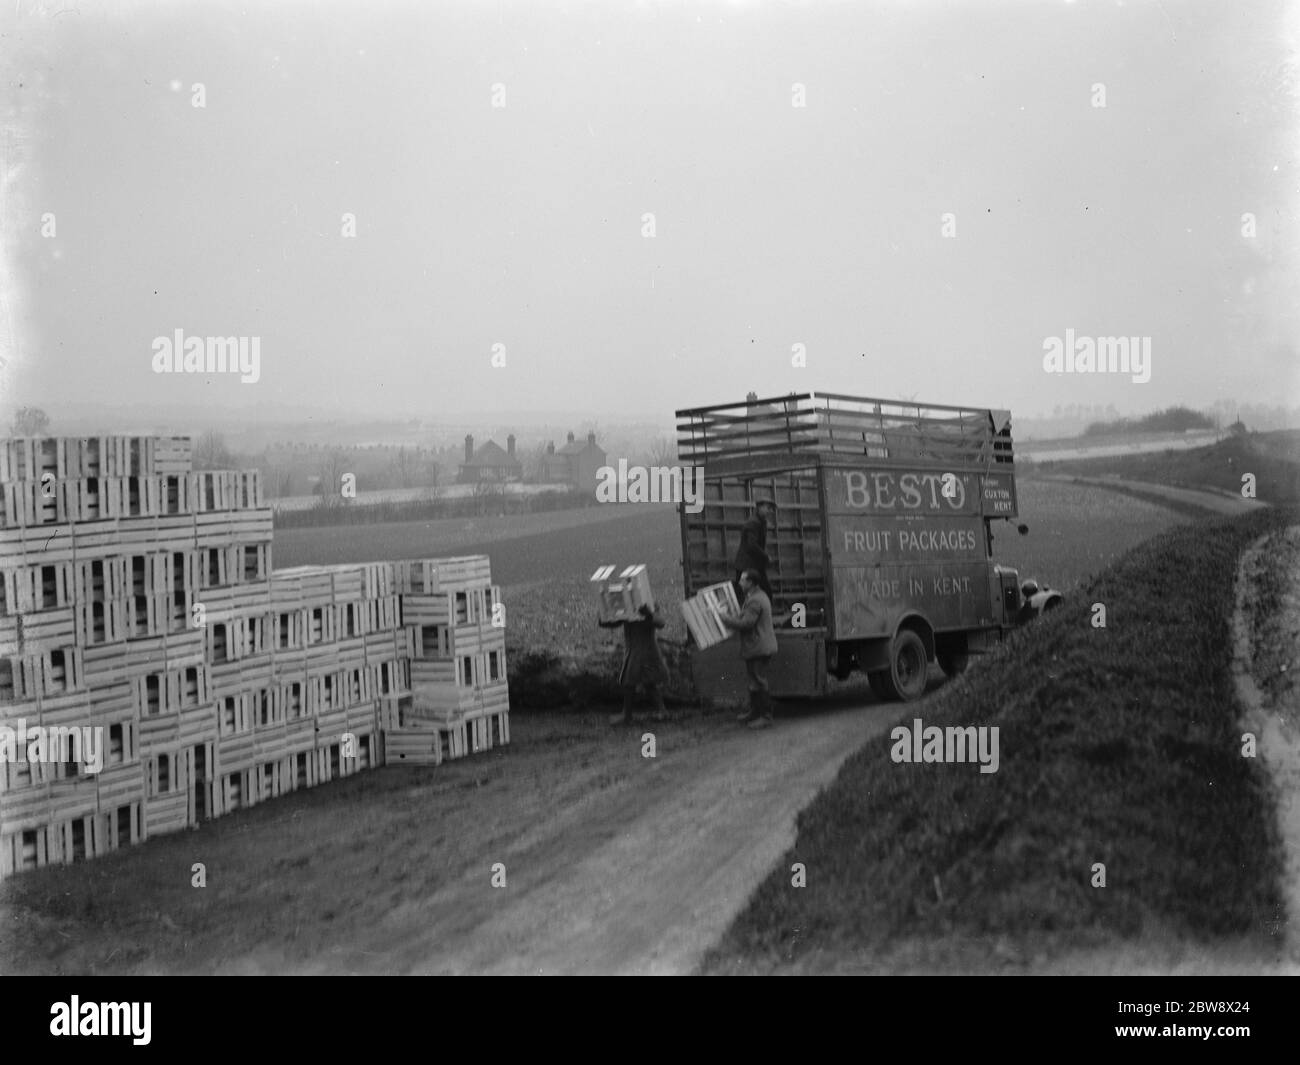 Unloading boxes from a truck which belongs to Besto the fruit packaging company from Kent . 1937 Stock Photo